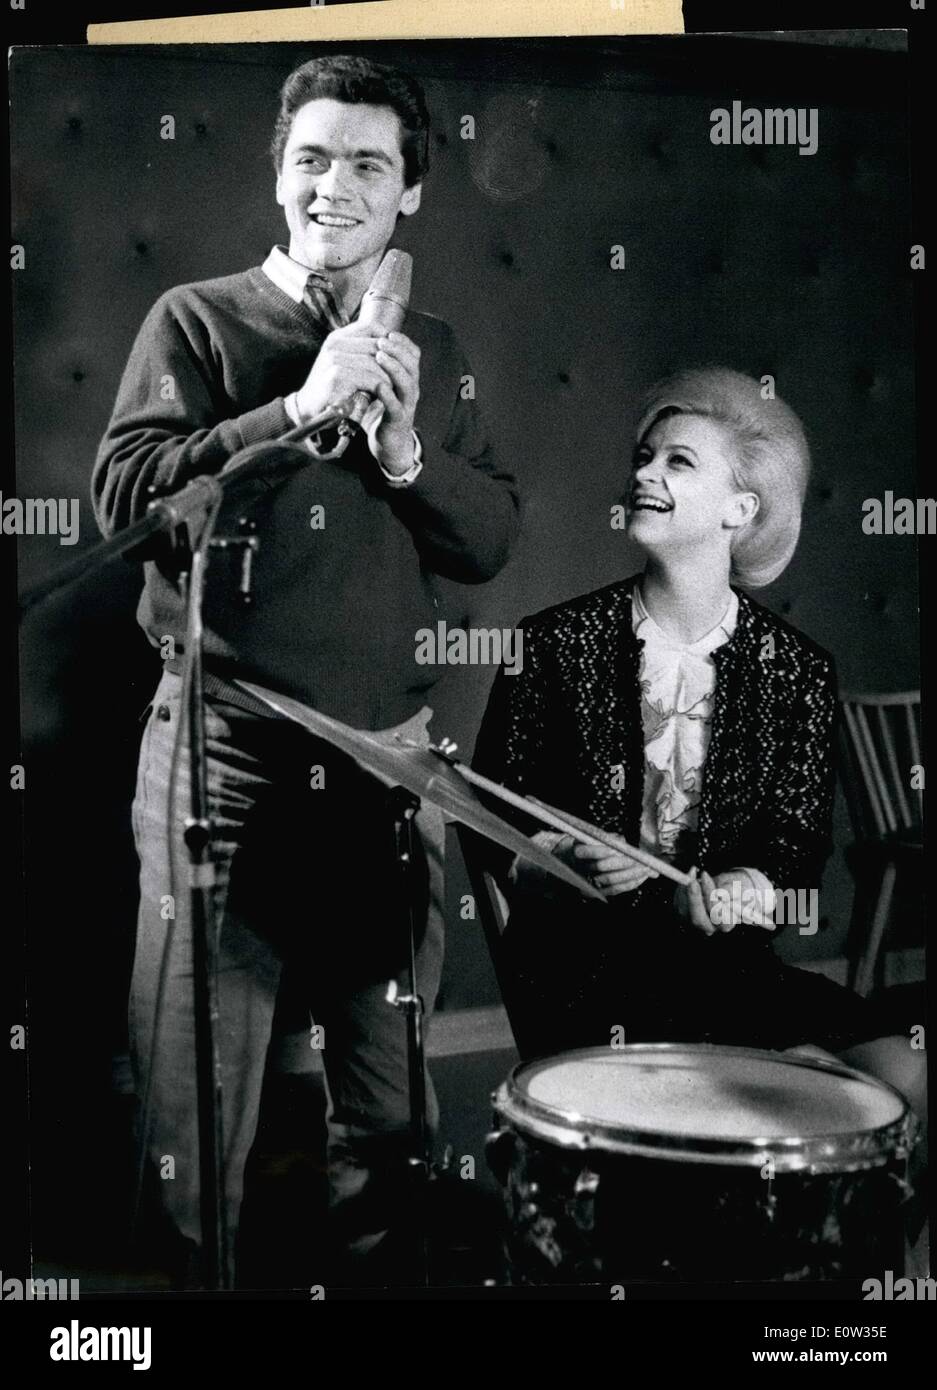 Mar. 03, 1961 - Pictured are hit singer and former Olympic athlete Hans-Juergen Baeumler and Marika Kilius. They are in a private recording studio in Walldorf near Frankfurt as Baeumler attempts to record his first LP. Brigitte Bardot Shooting a New Year's Eve Special Stock Photo